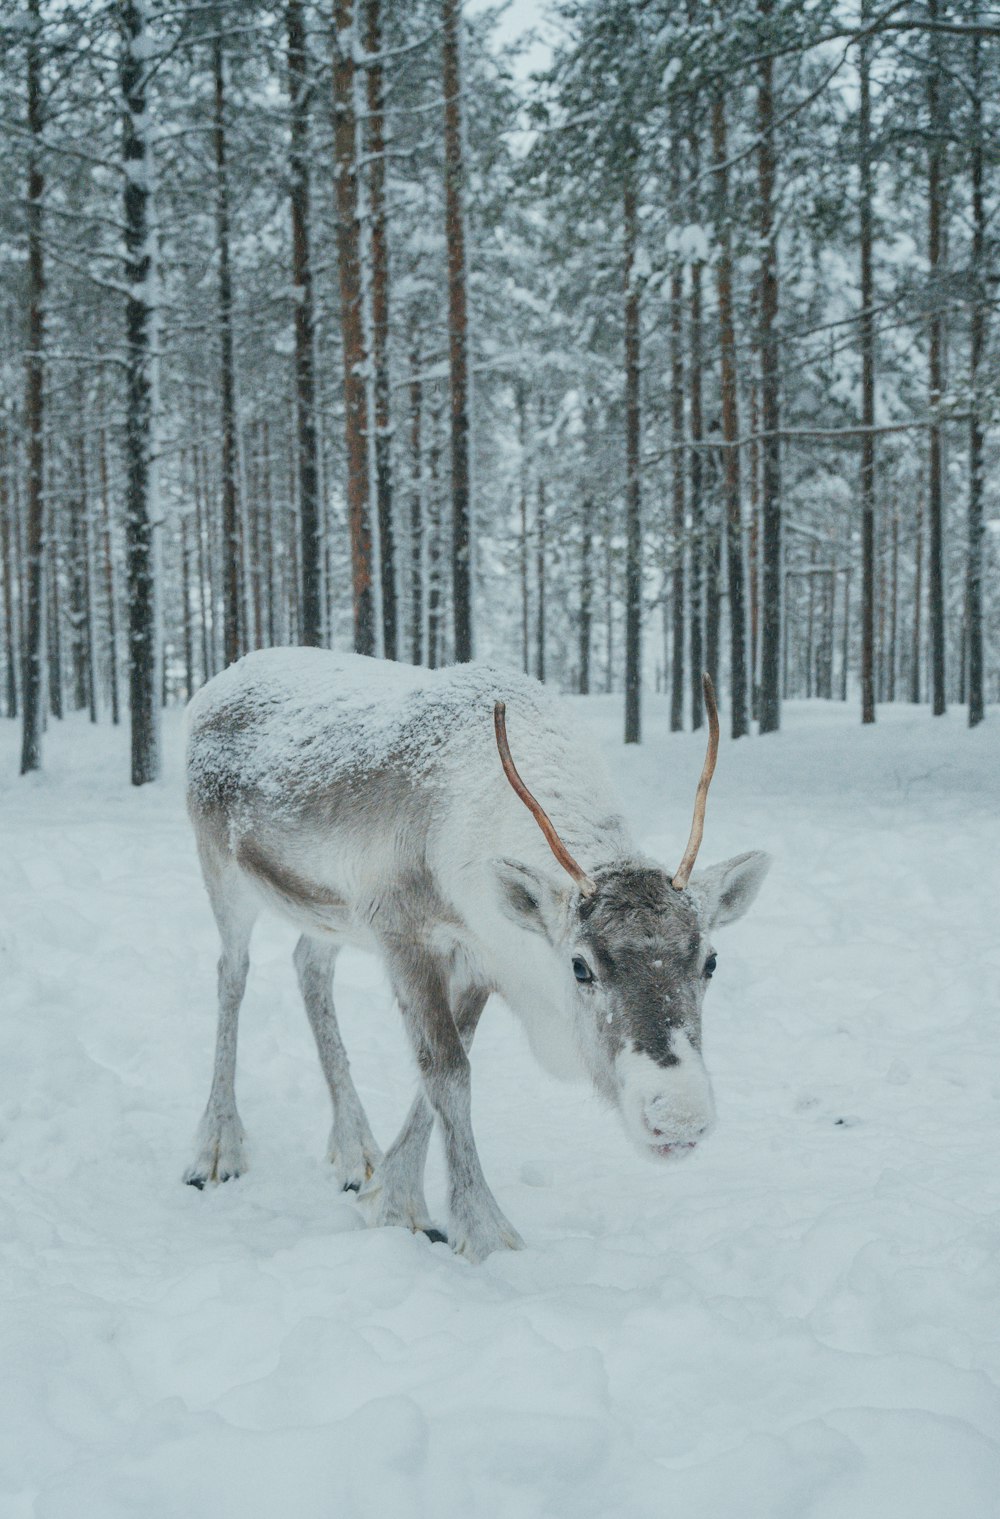 a reindeer with horns standing in the snow